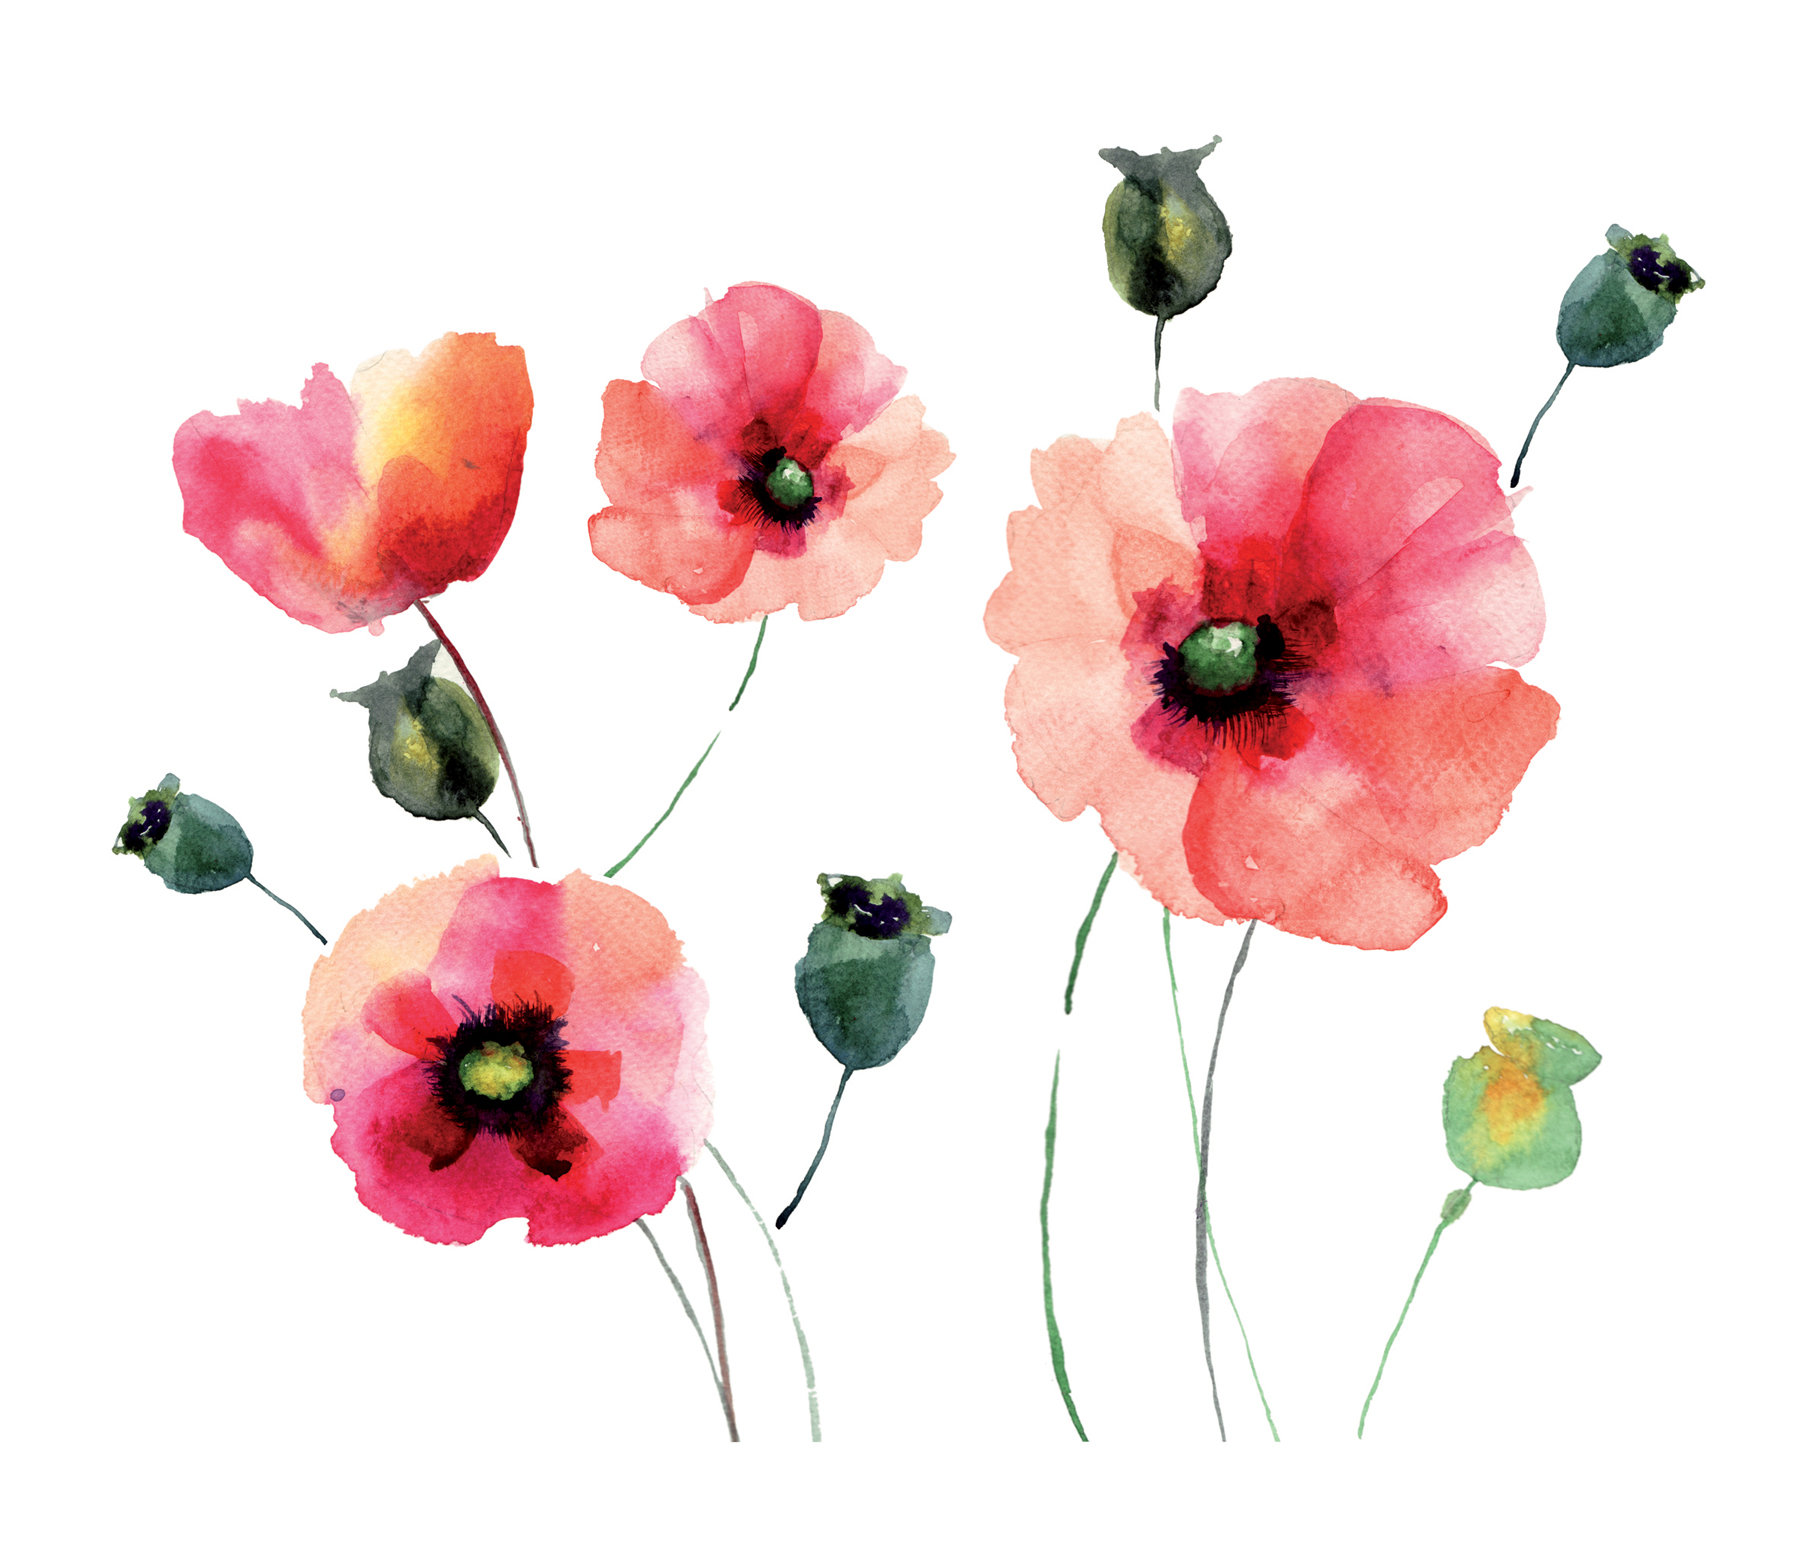 Watercolor Pictures Of Poppies at PaintingValley.com | Explore ...